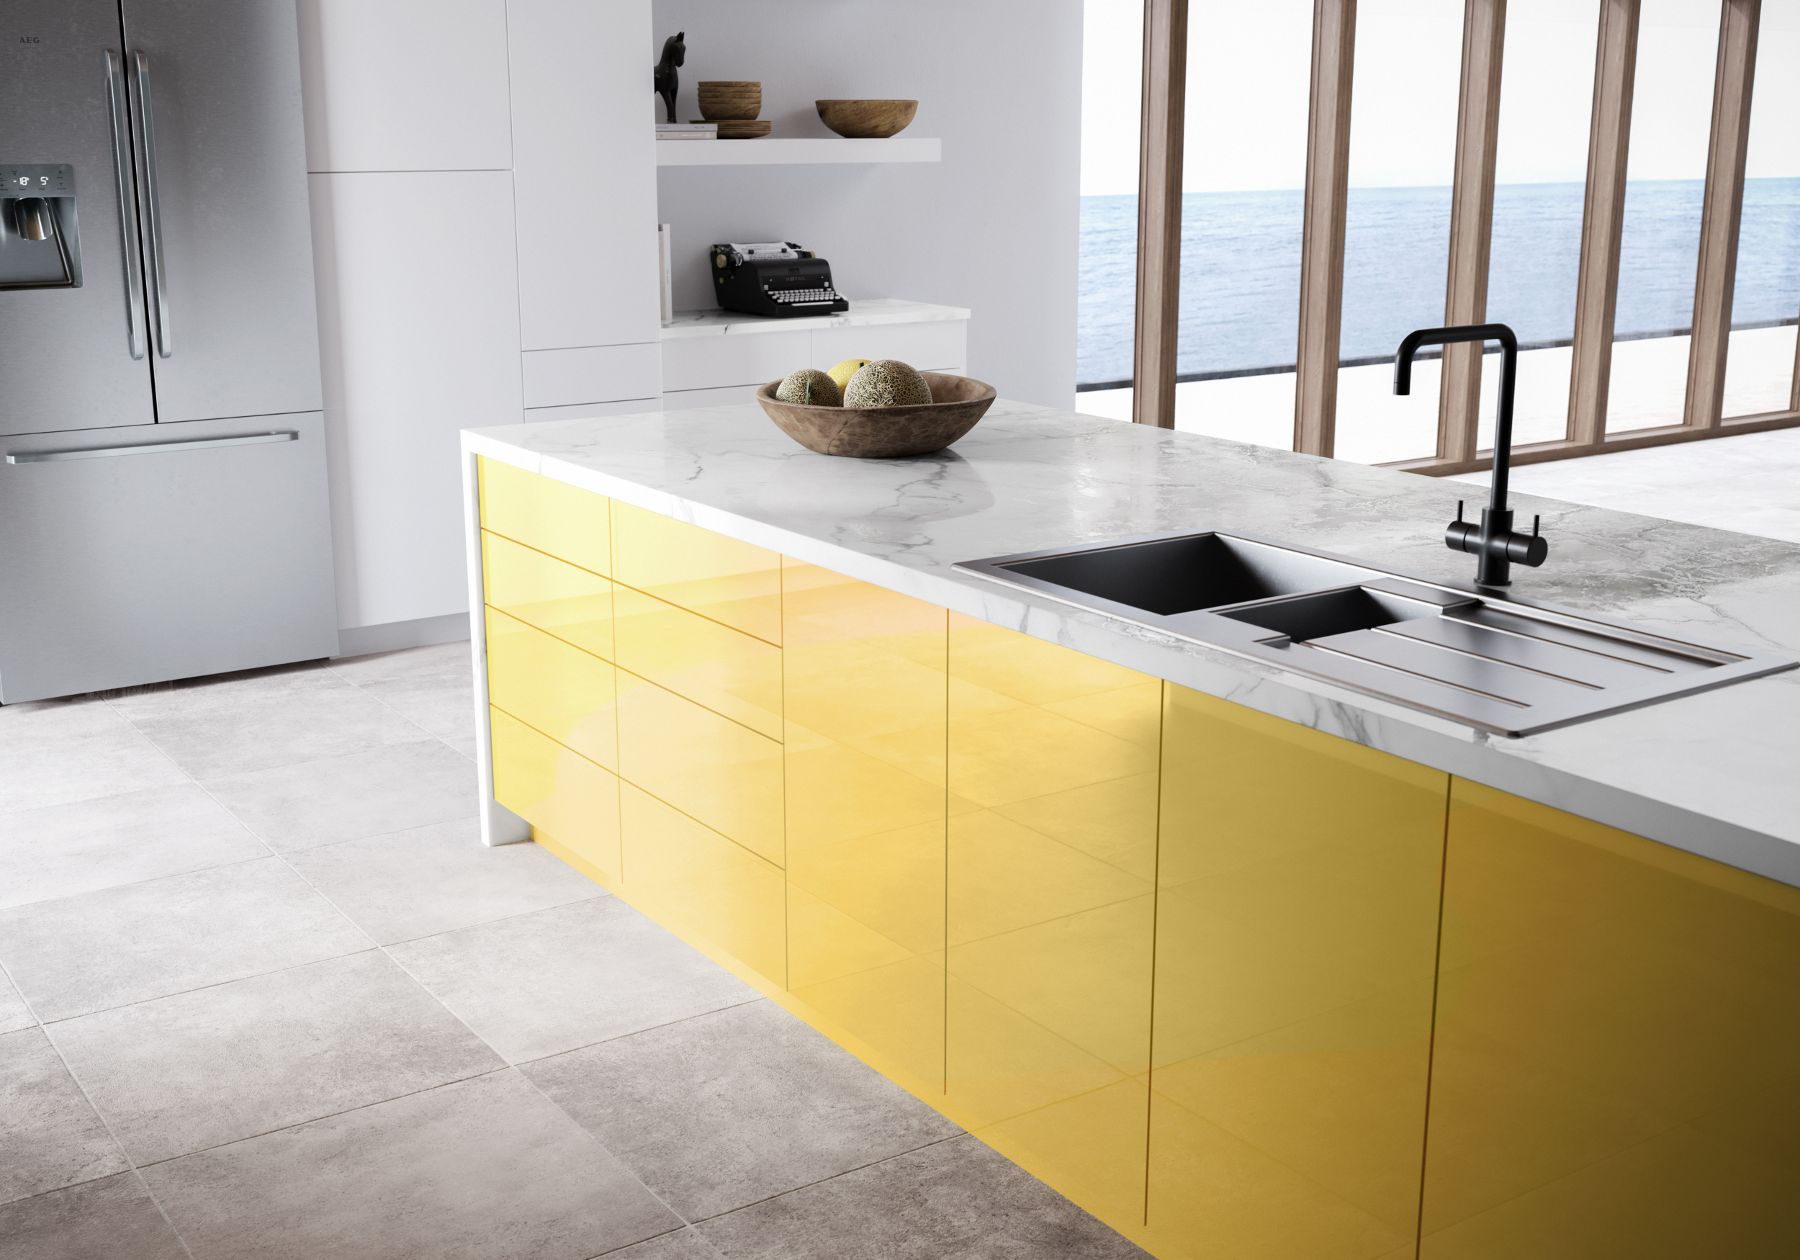 Stunning marble countertops over bright yellow cabinets.